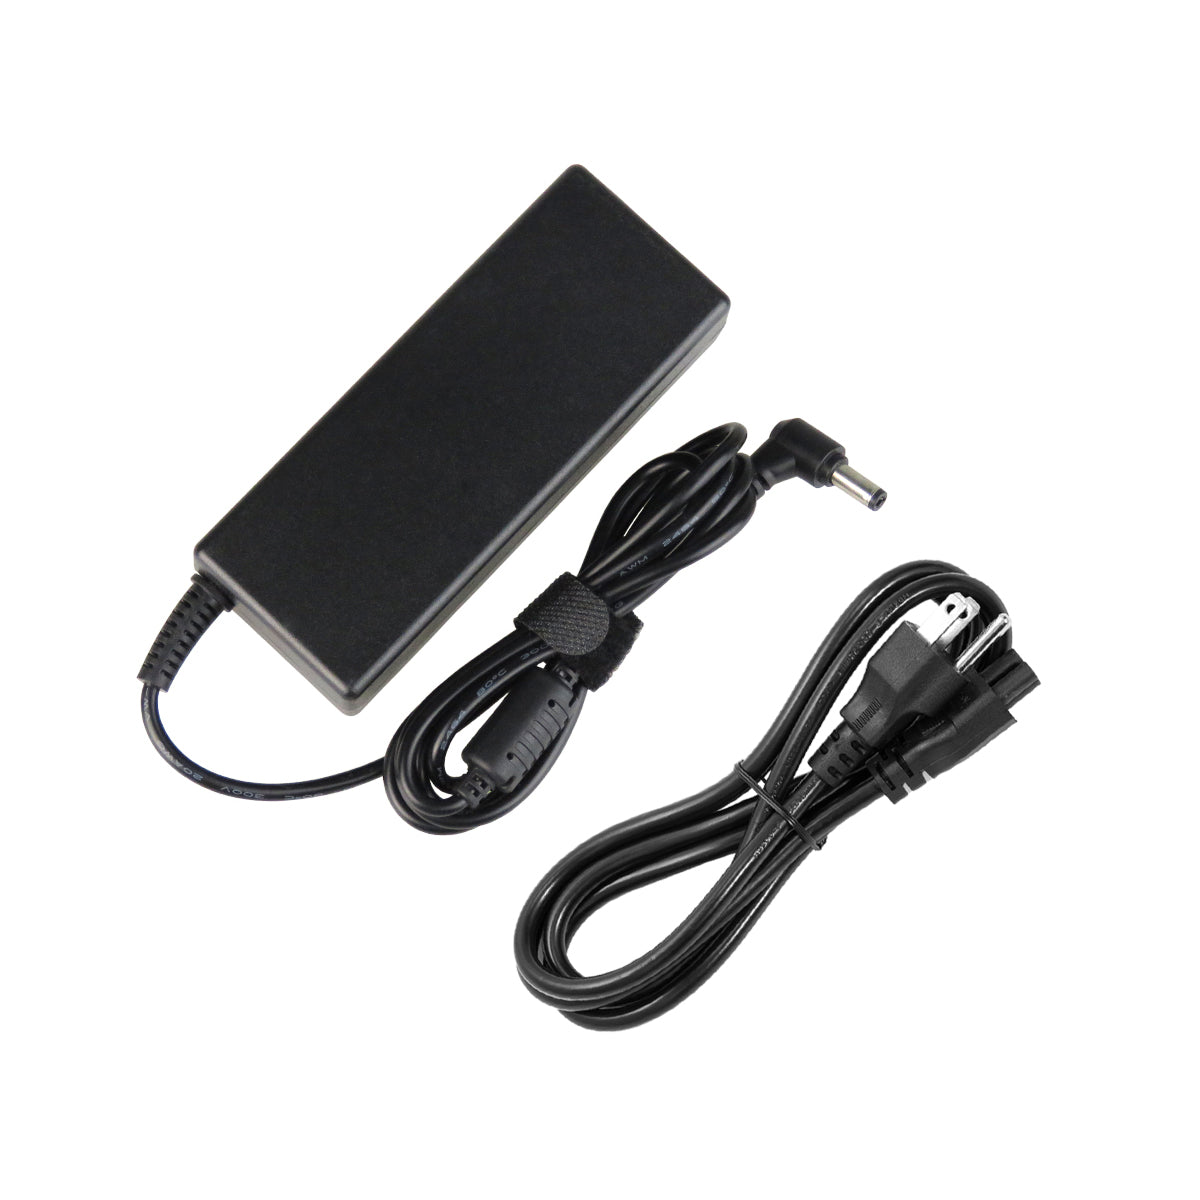 AC Adapter Charger for ASUS X54L-SX044V Notebook.